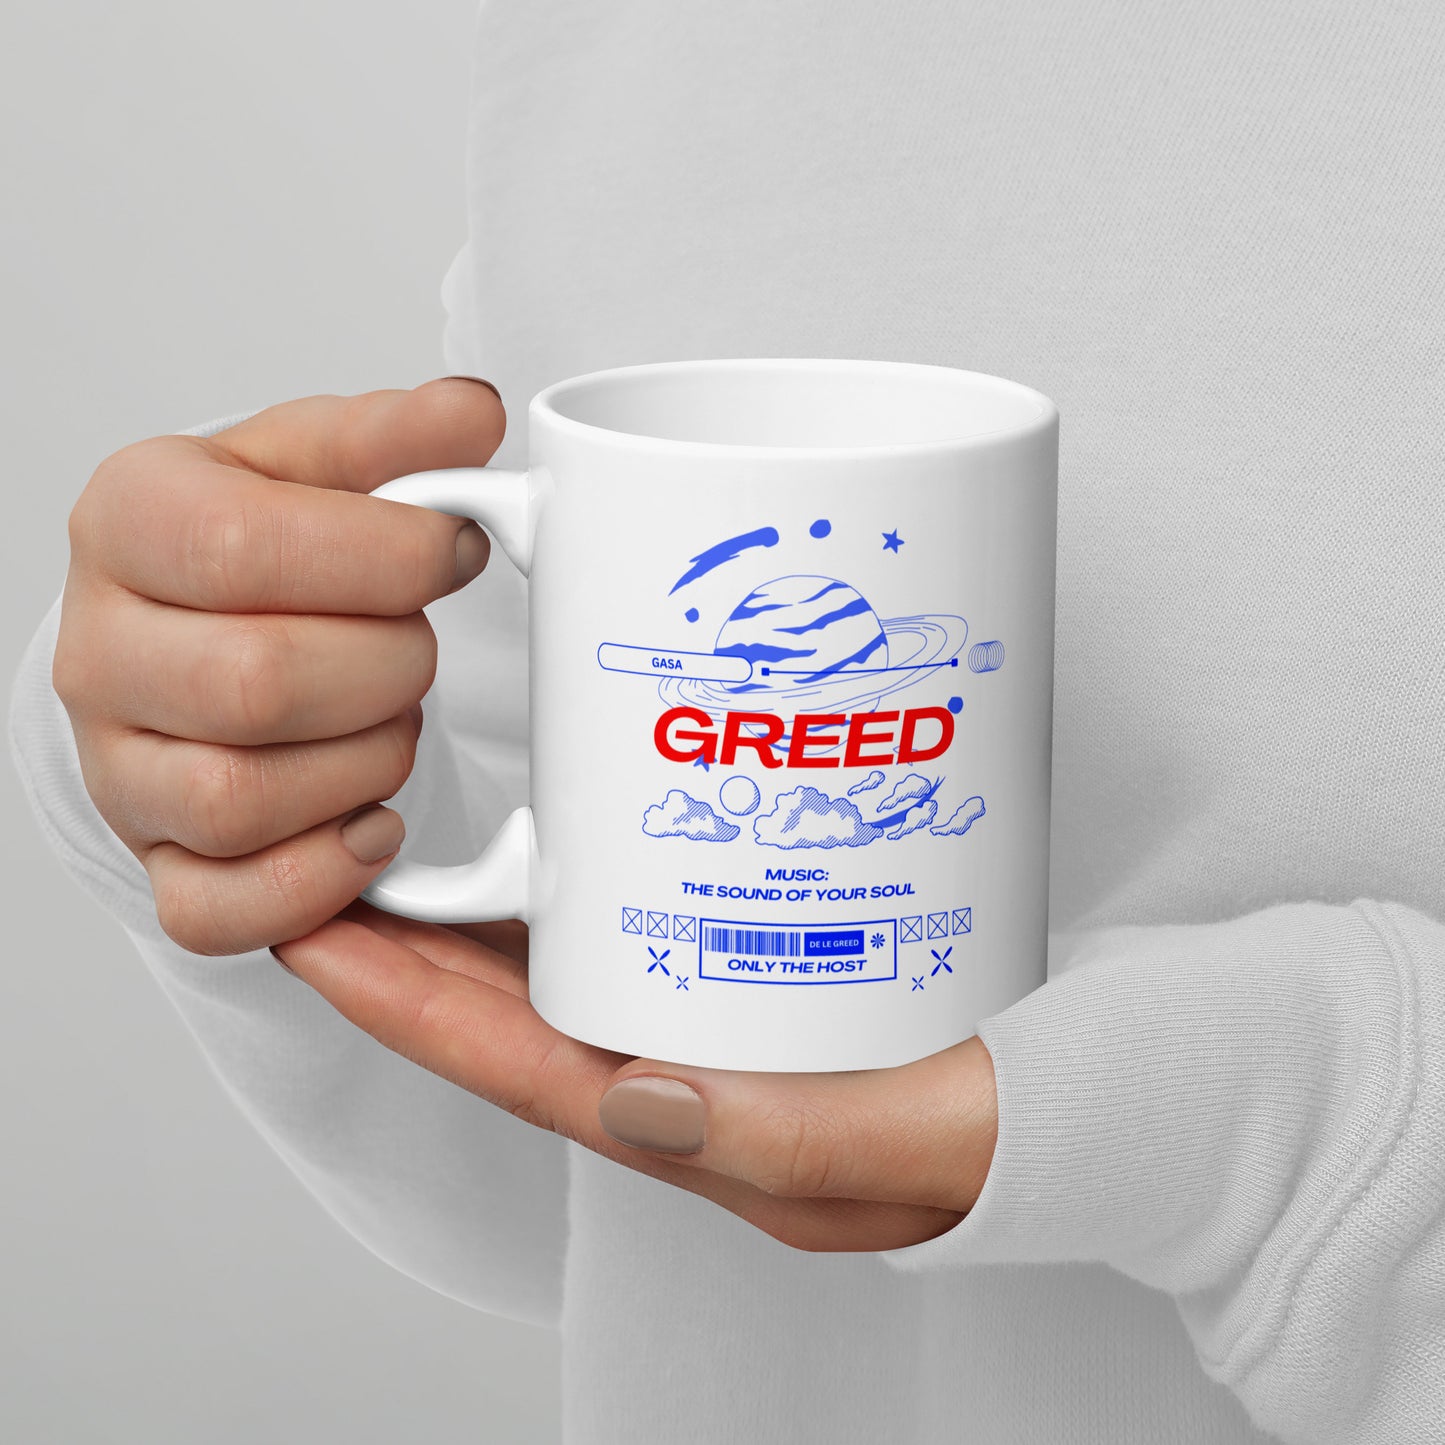 De Le Greed Sound of Your Soul White Glossy Mug